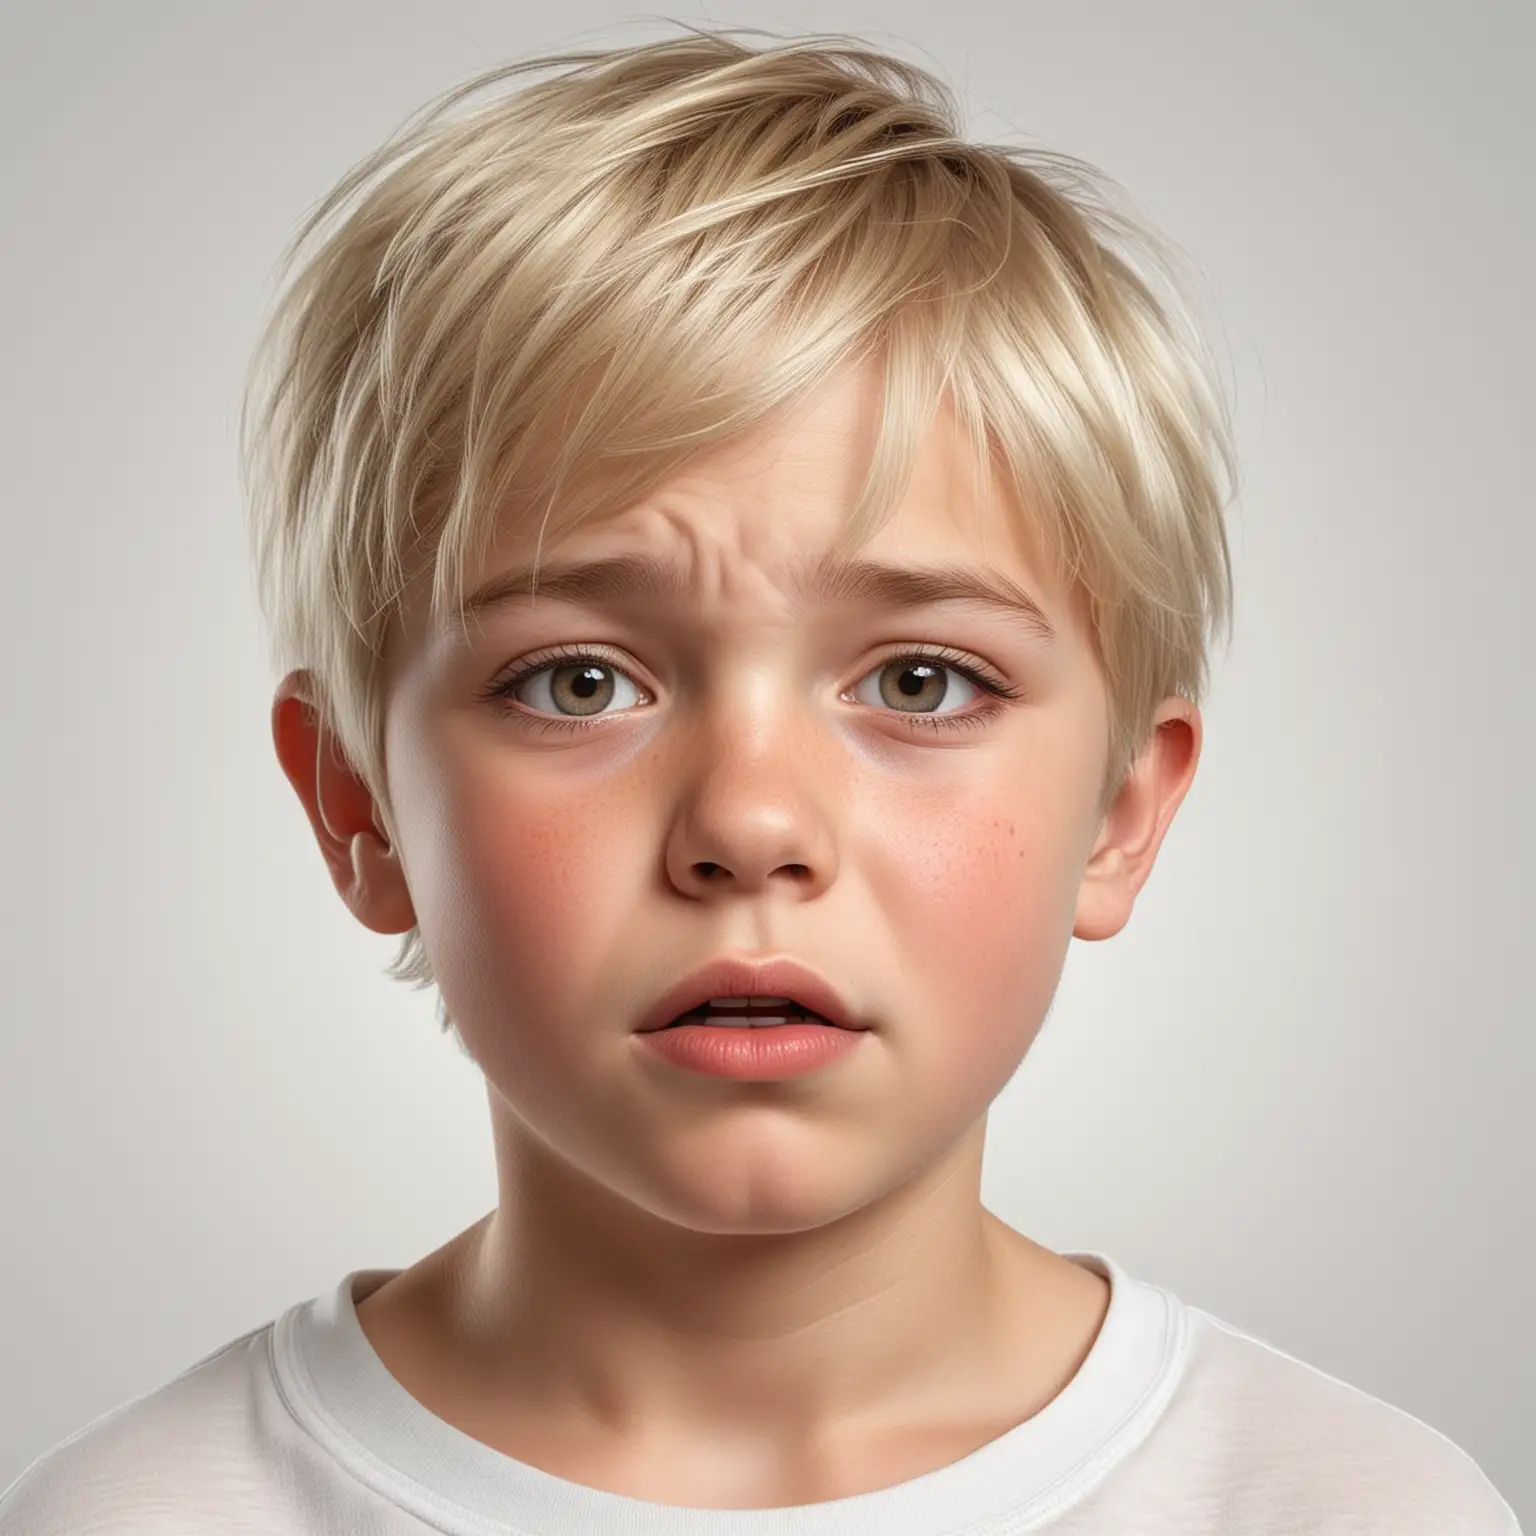 Embarrassed Blond Boy with Red Cheeks and Uncertain Expression on White Background